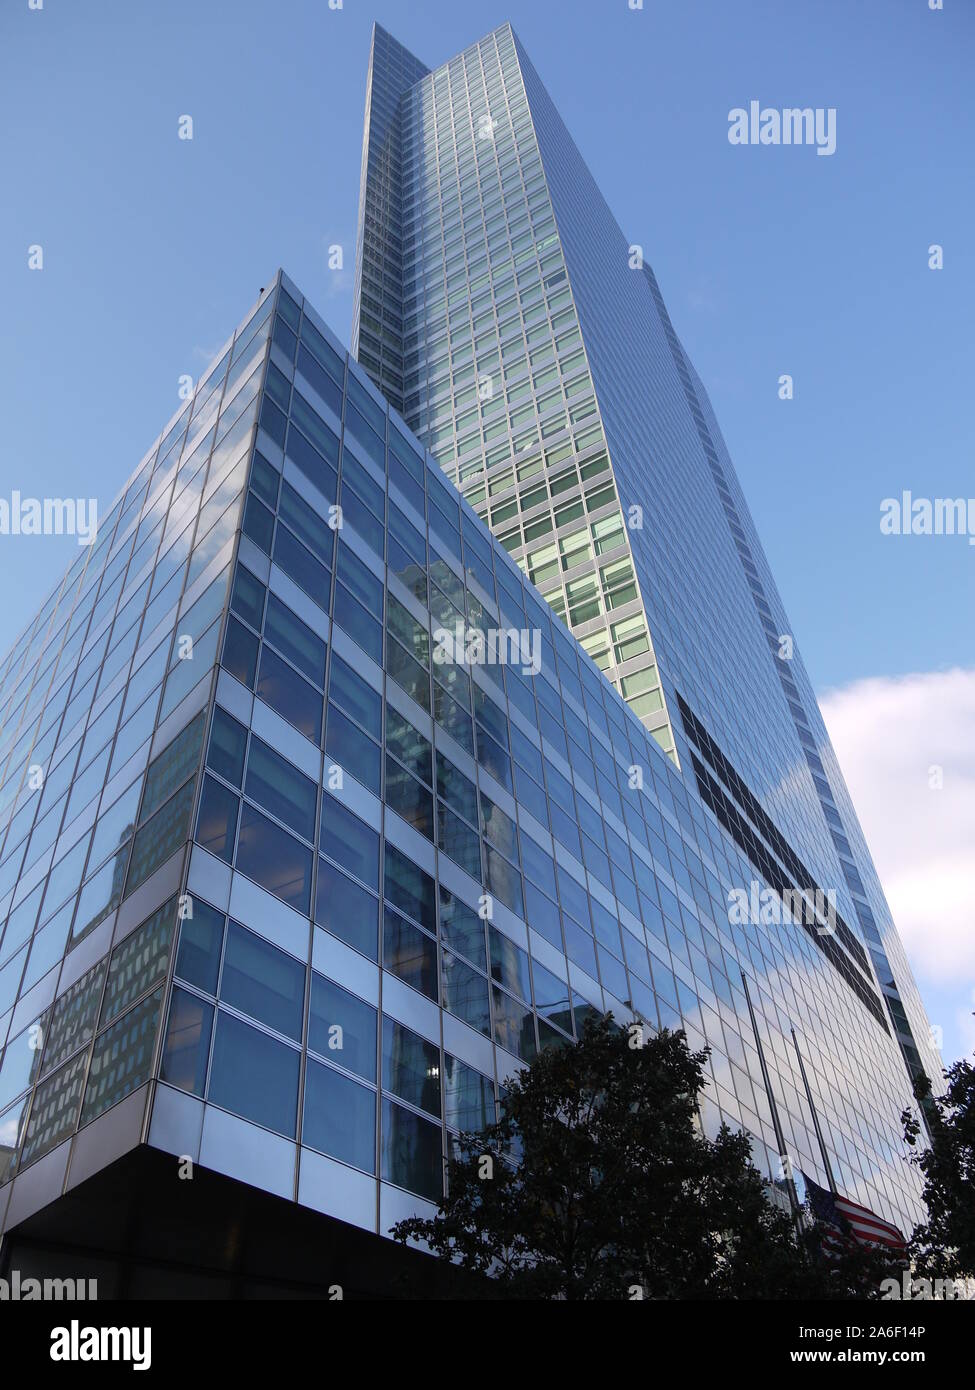 Goldman Sachs main building in financial district, New York Stock Photo